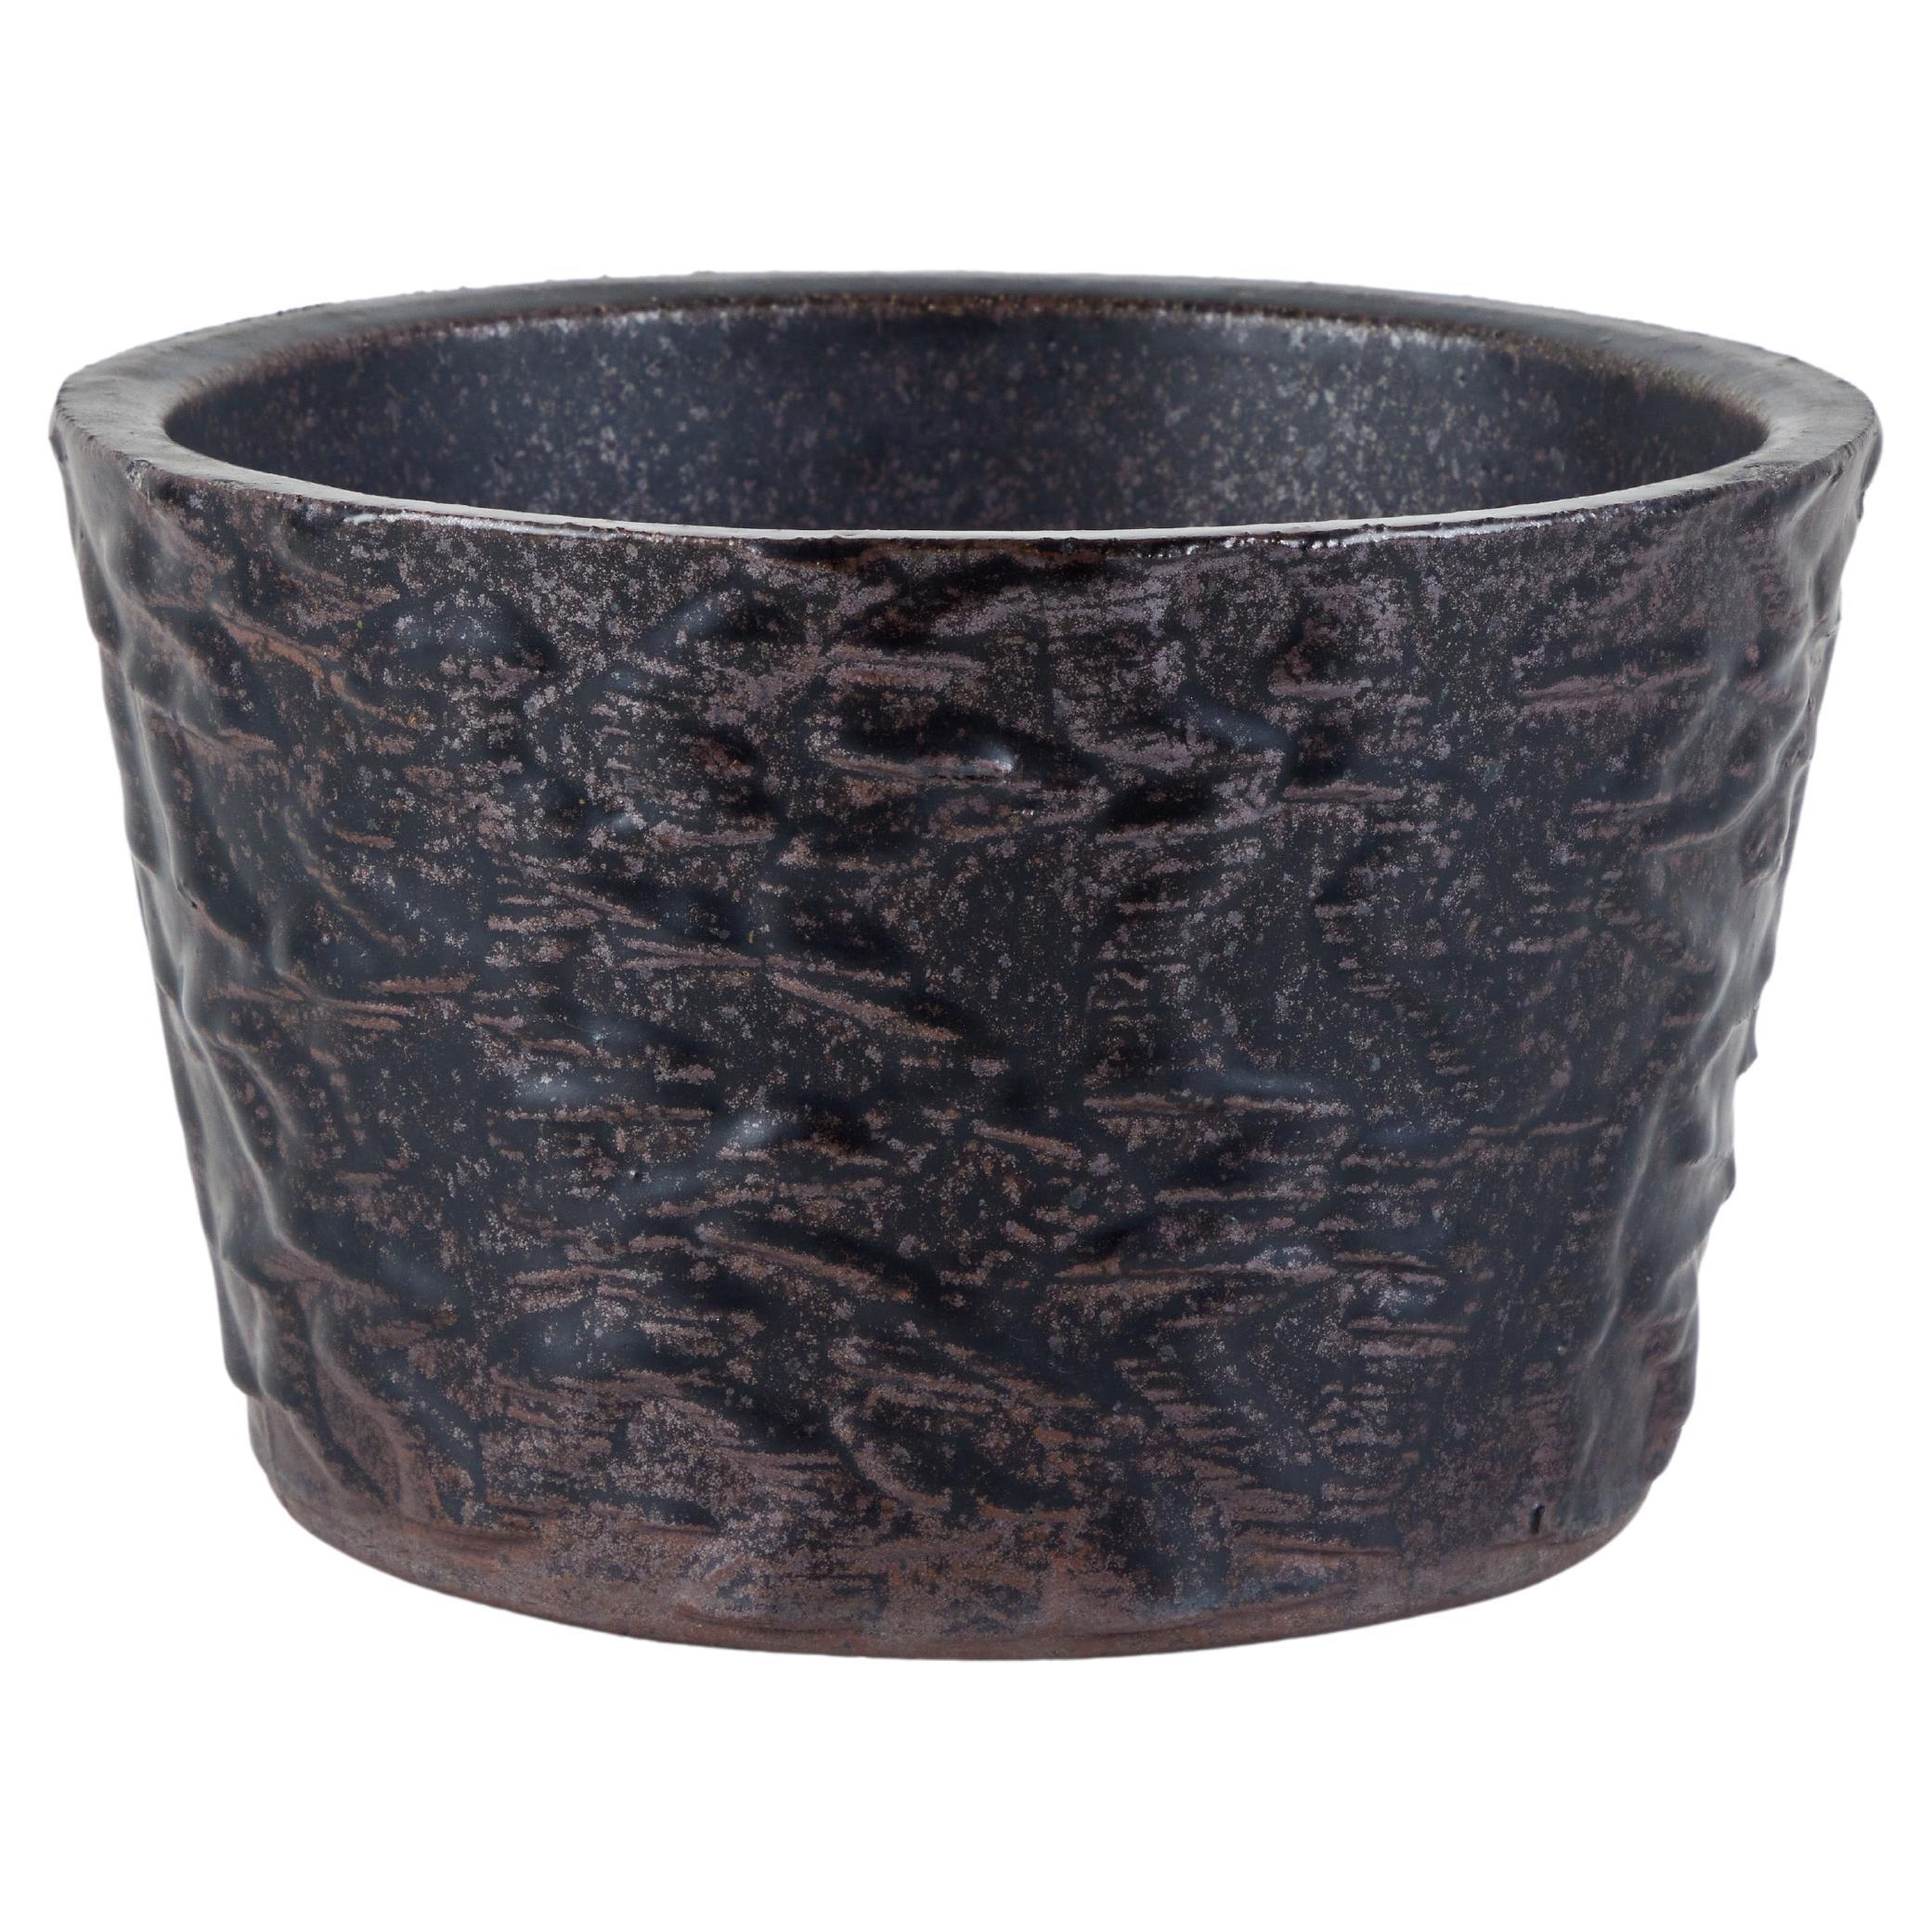 Malcolm Leland Planter for Architectural Pottery